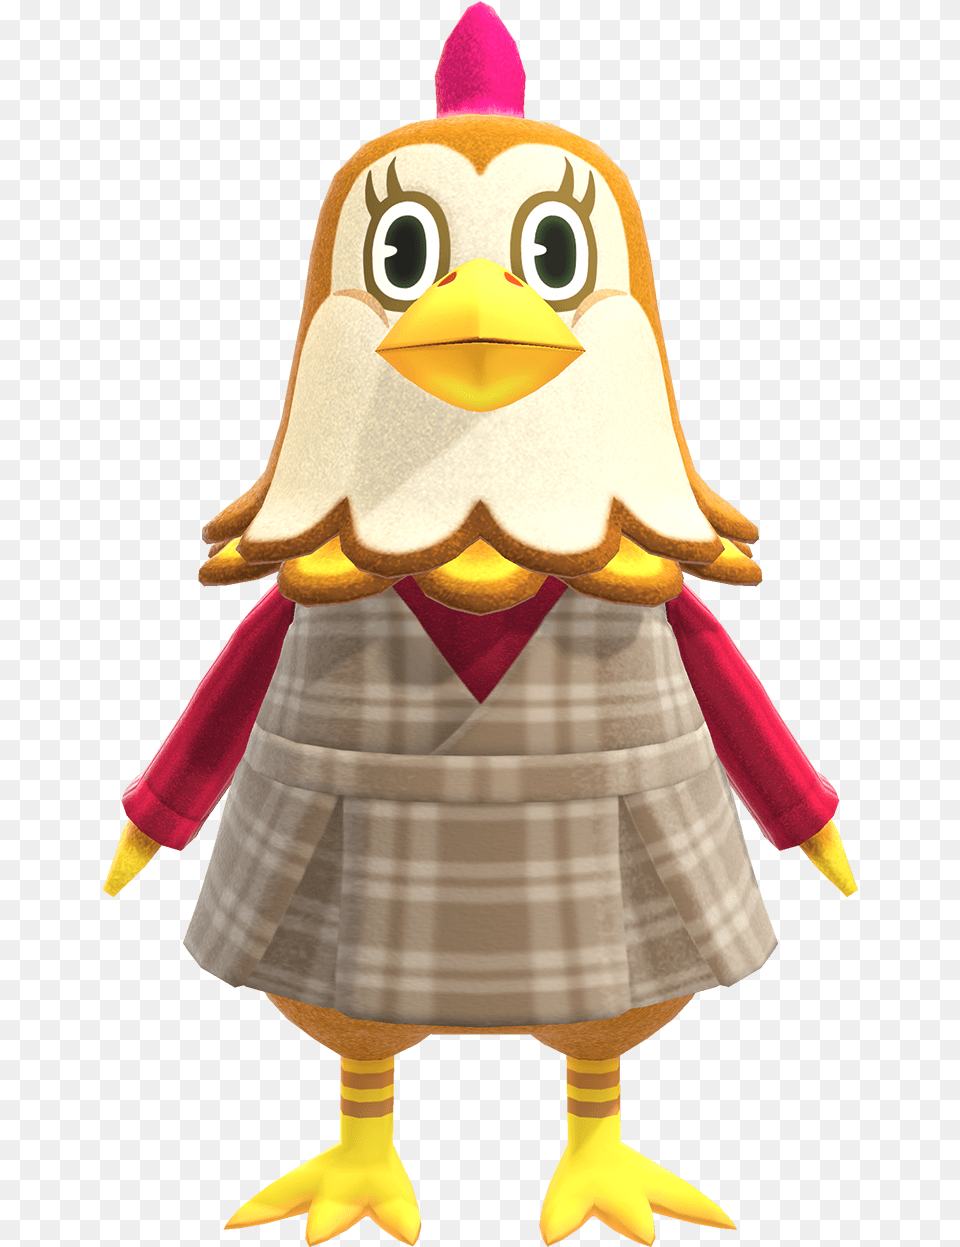 Ava Nookipedia The Animal Crossing Wiki Ava From Animal Crossing, Plush, Toy, Doll Png